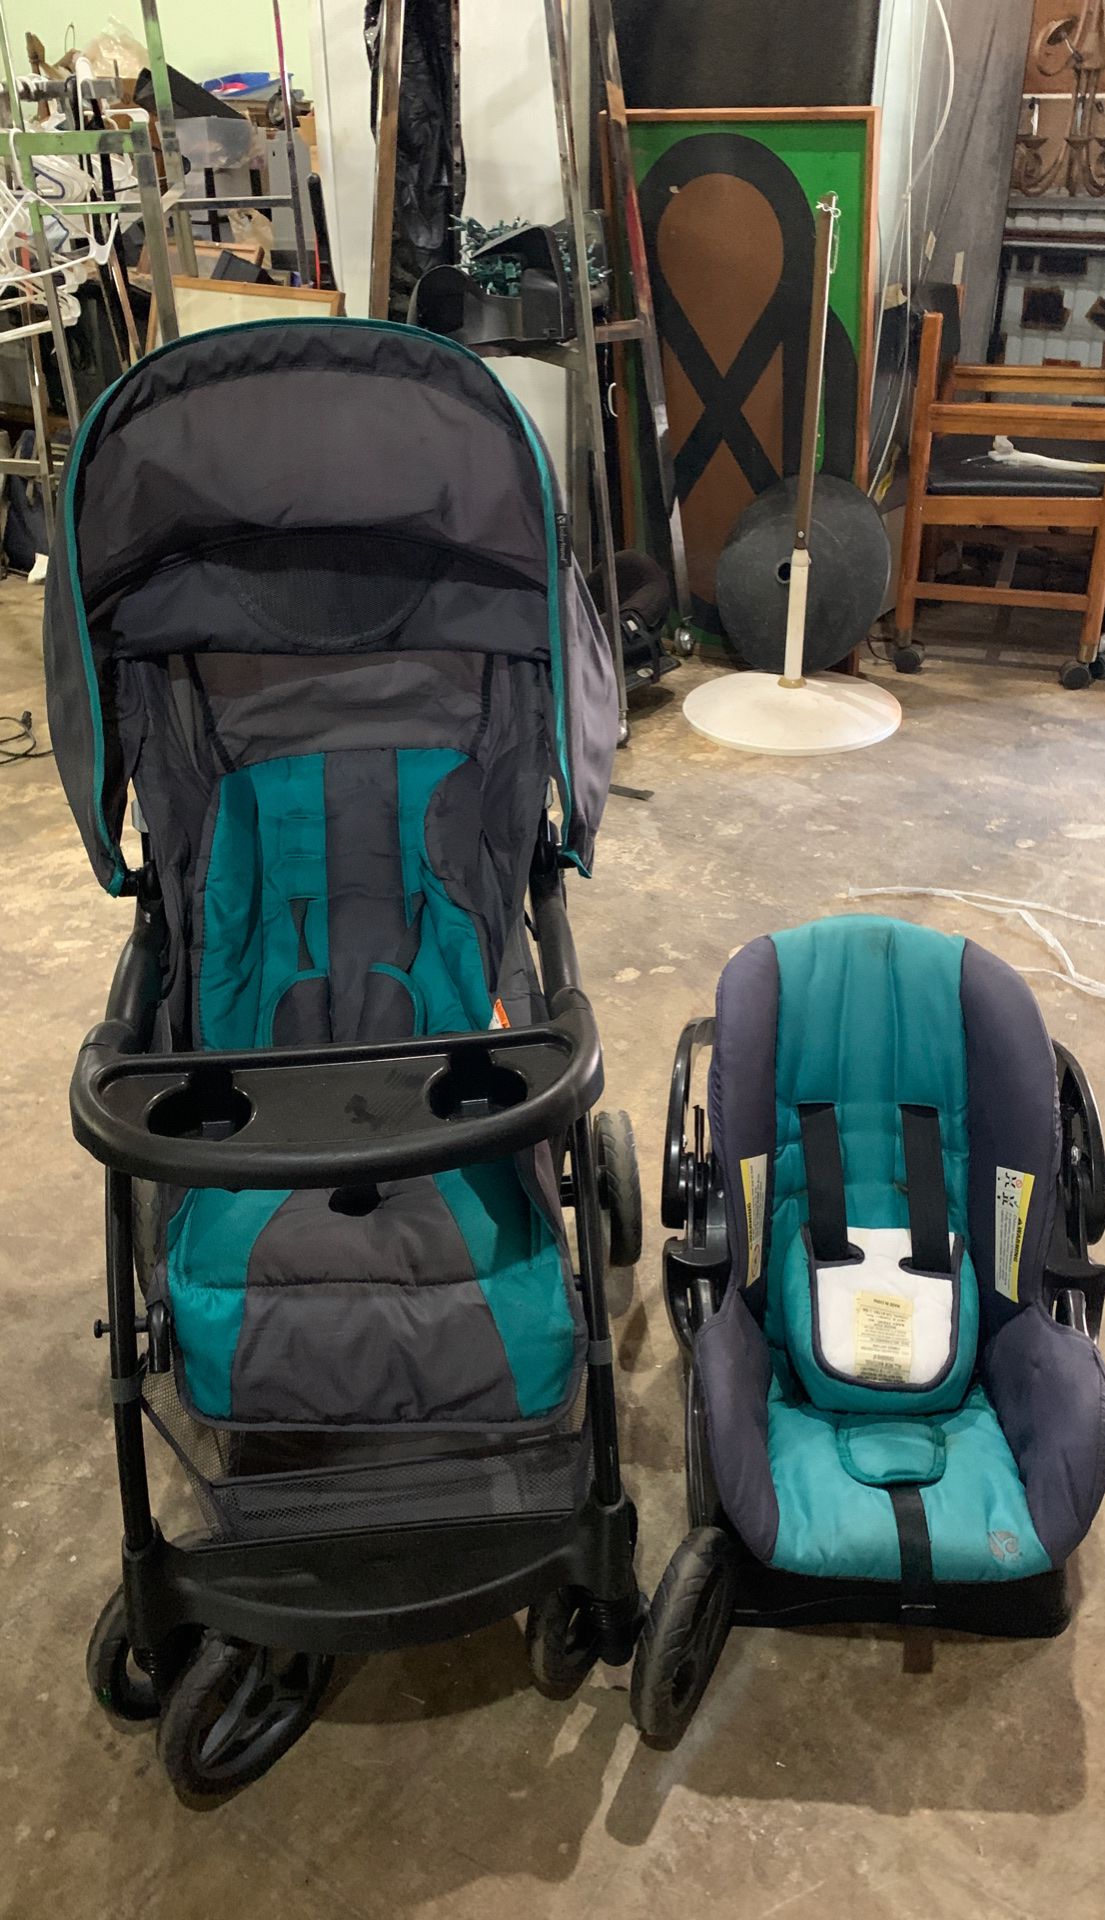 Baby car seat and stroller